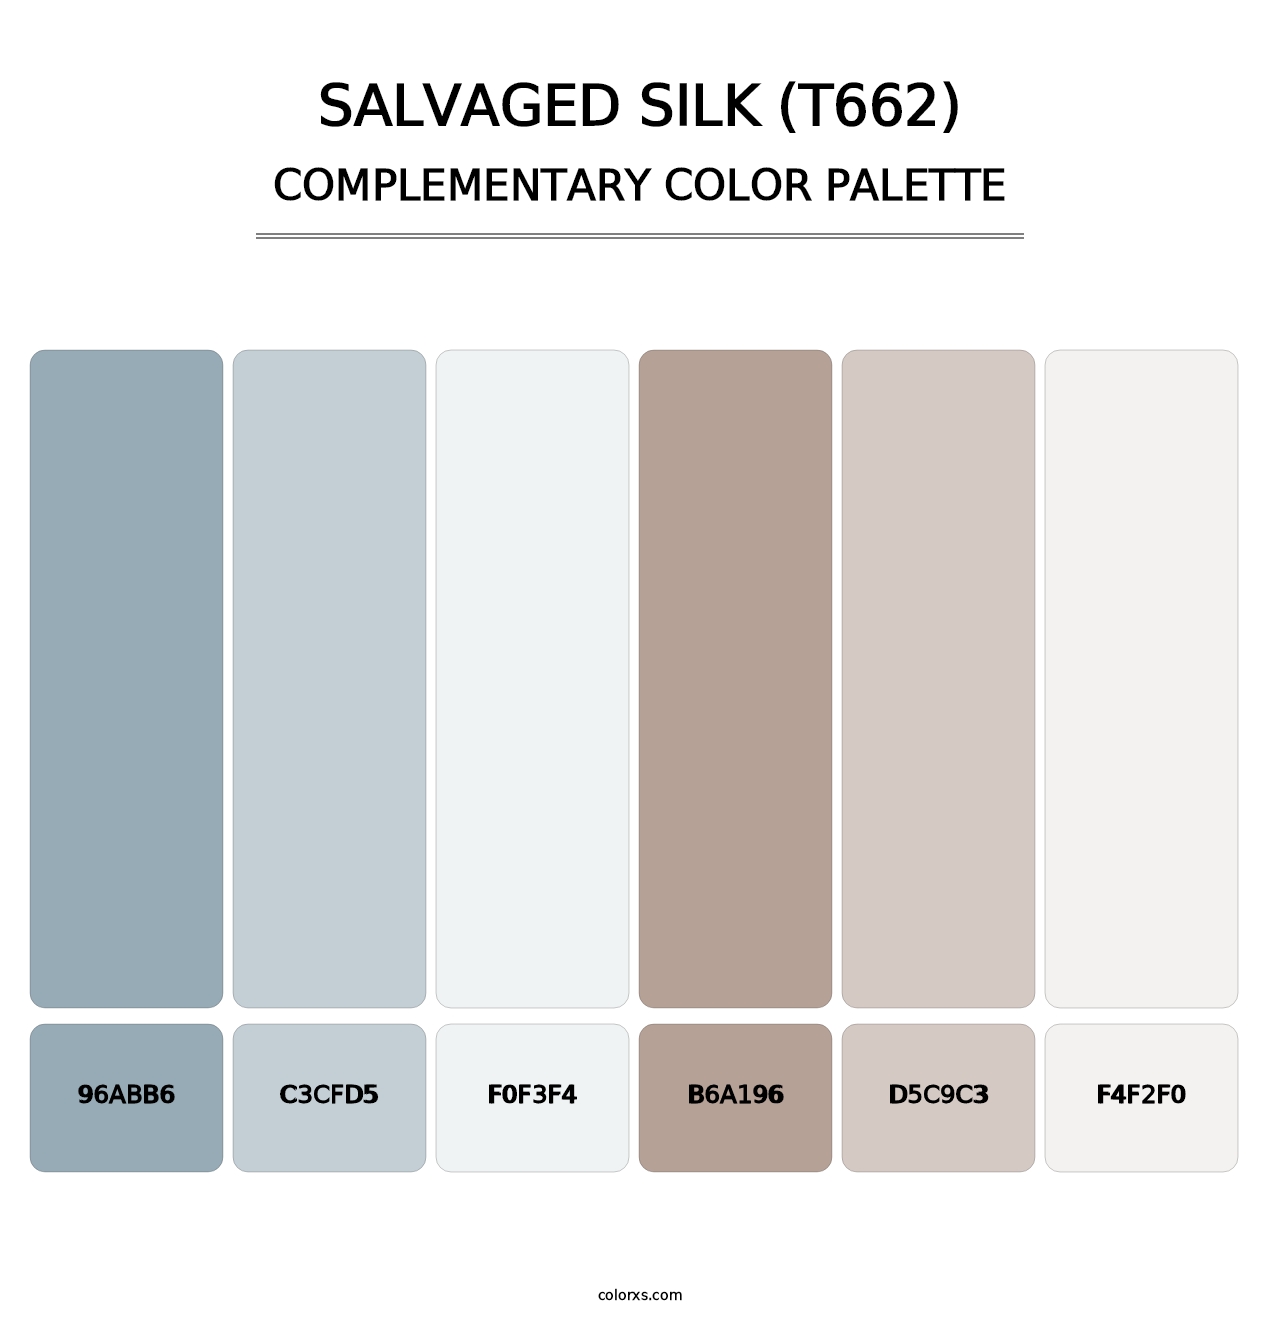 Salvaged Silk (T662) - Complementary Color Palette